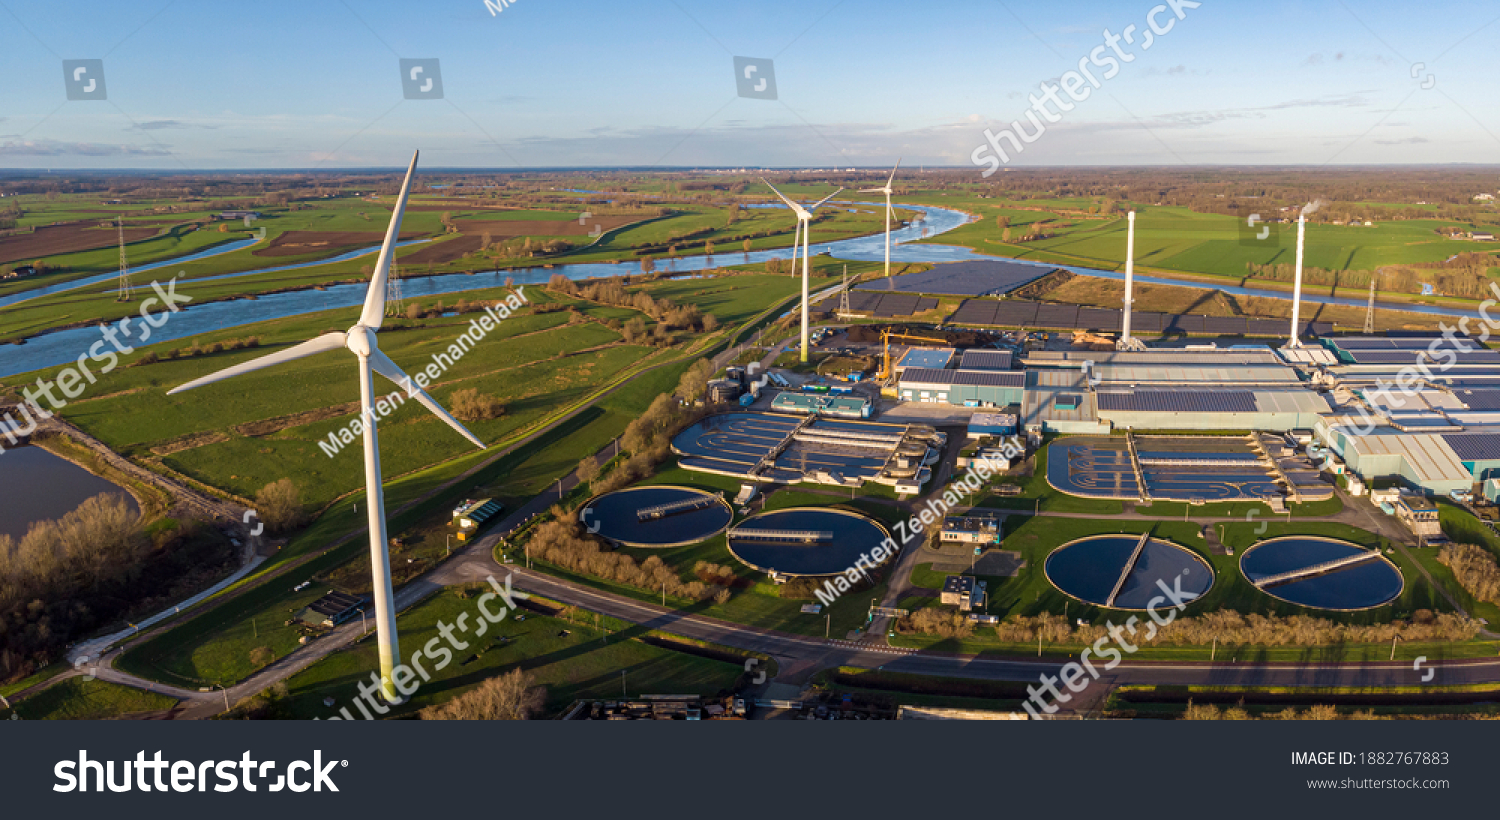 Wind turbines, water treatment and bio energy facility and solar panels in The Netherlands part of sustainable industry in Dutch flat river landscape against blue sky. Aerial circular economy concept. #1882767883